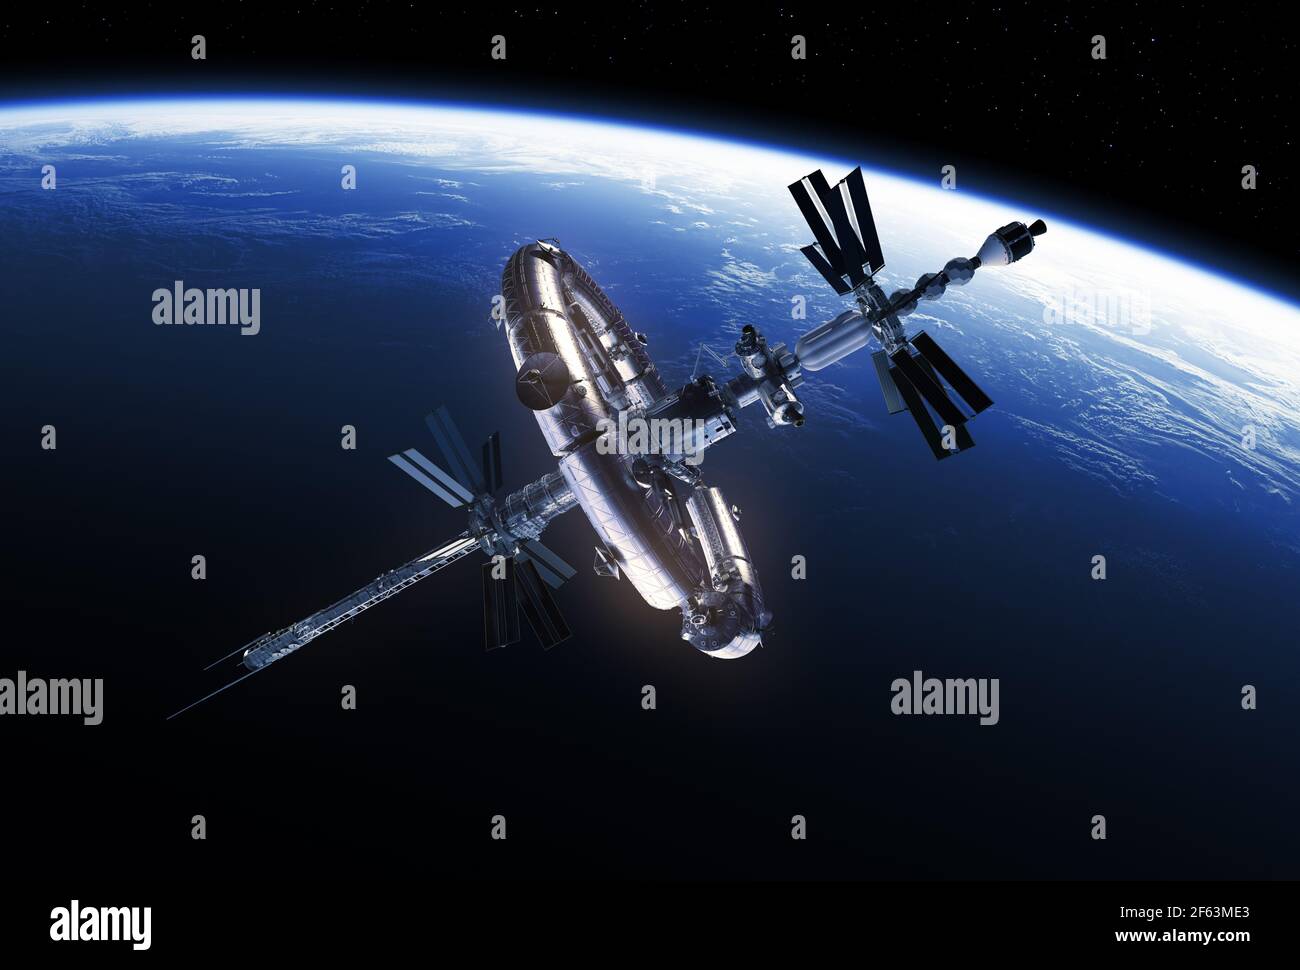 Big Space Station Orbiting Blue Planet Earth Stock Photo